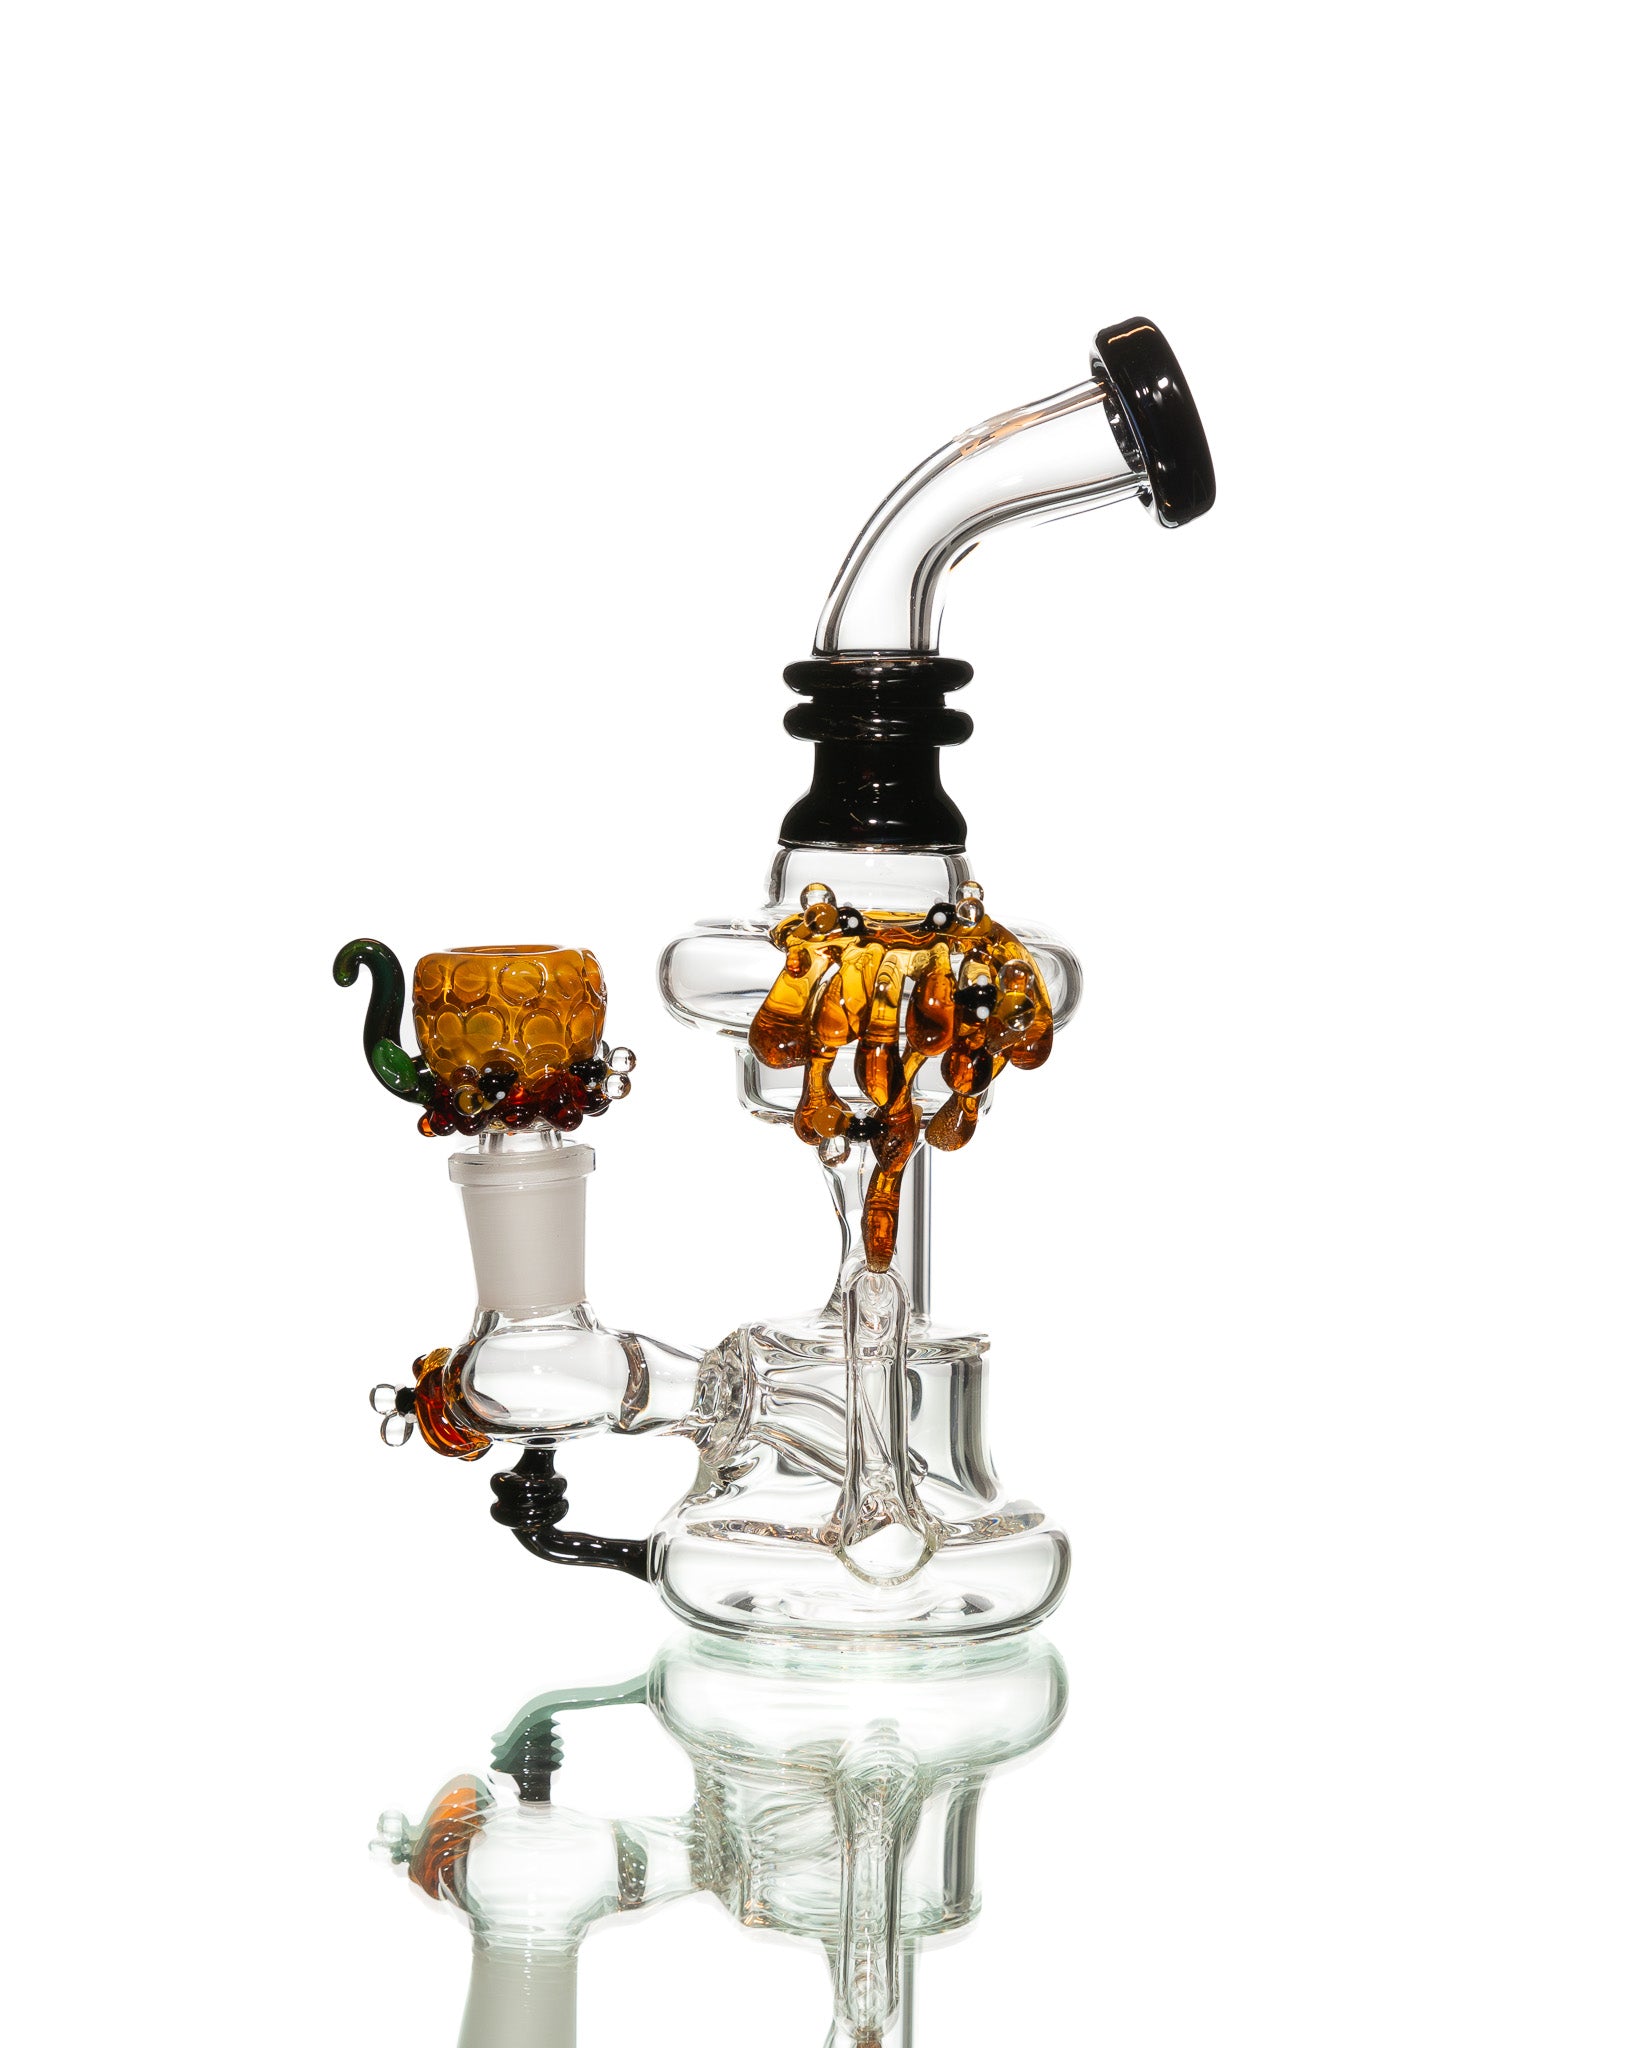 Empire Glassworks - "Save the Bees" Mini Recycler